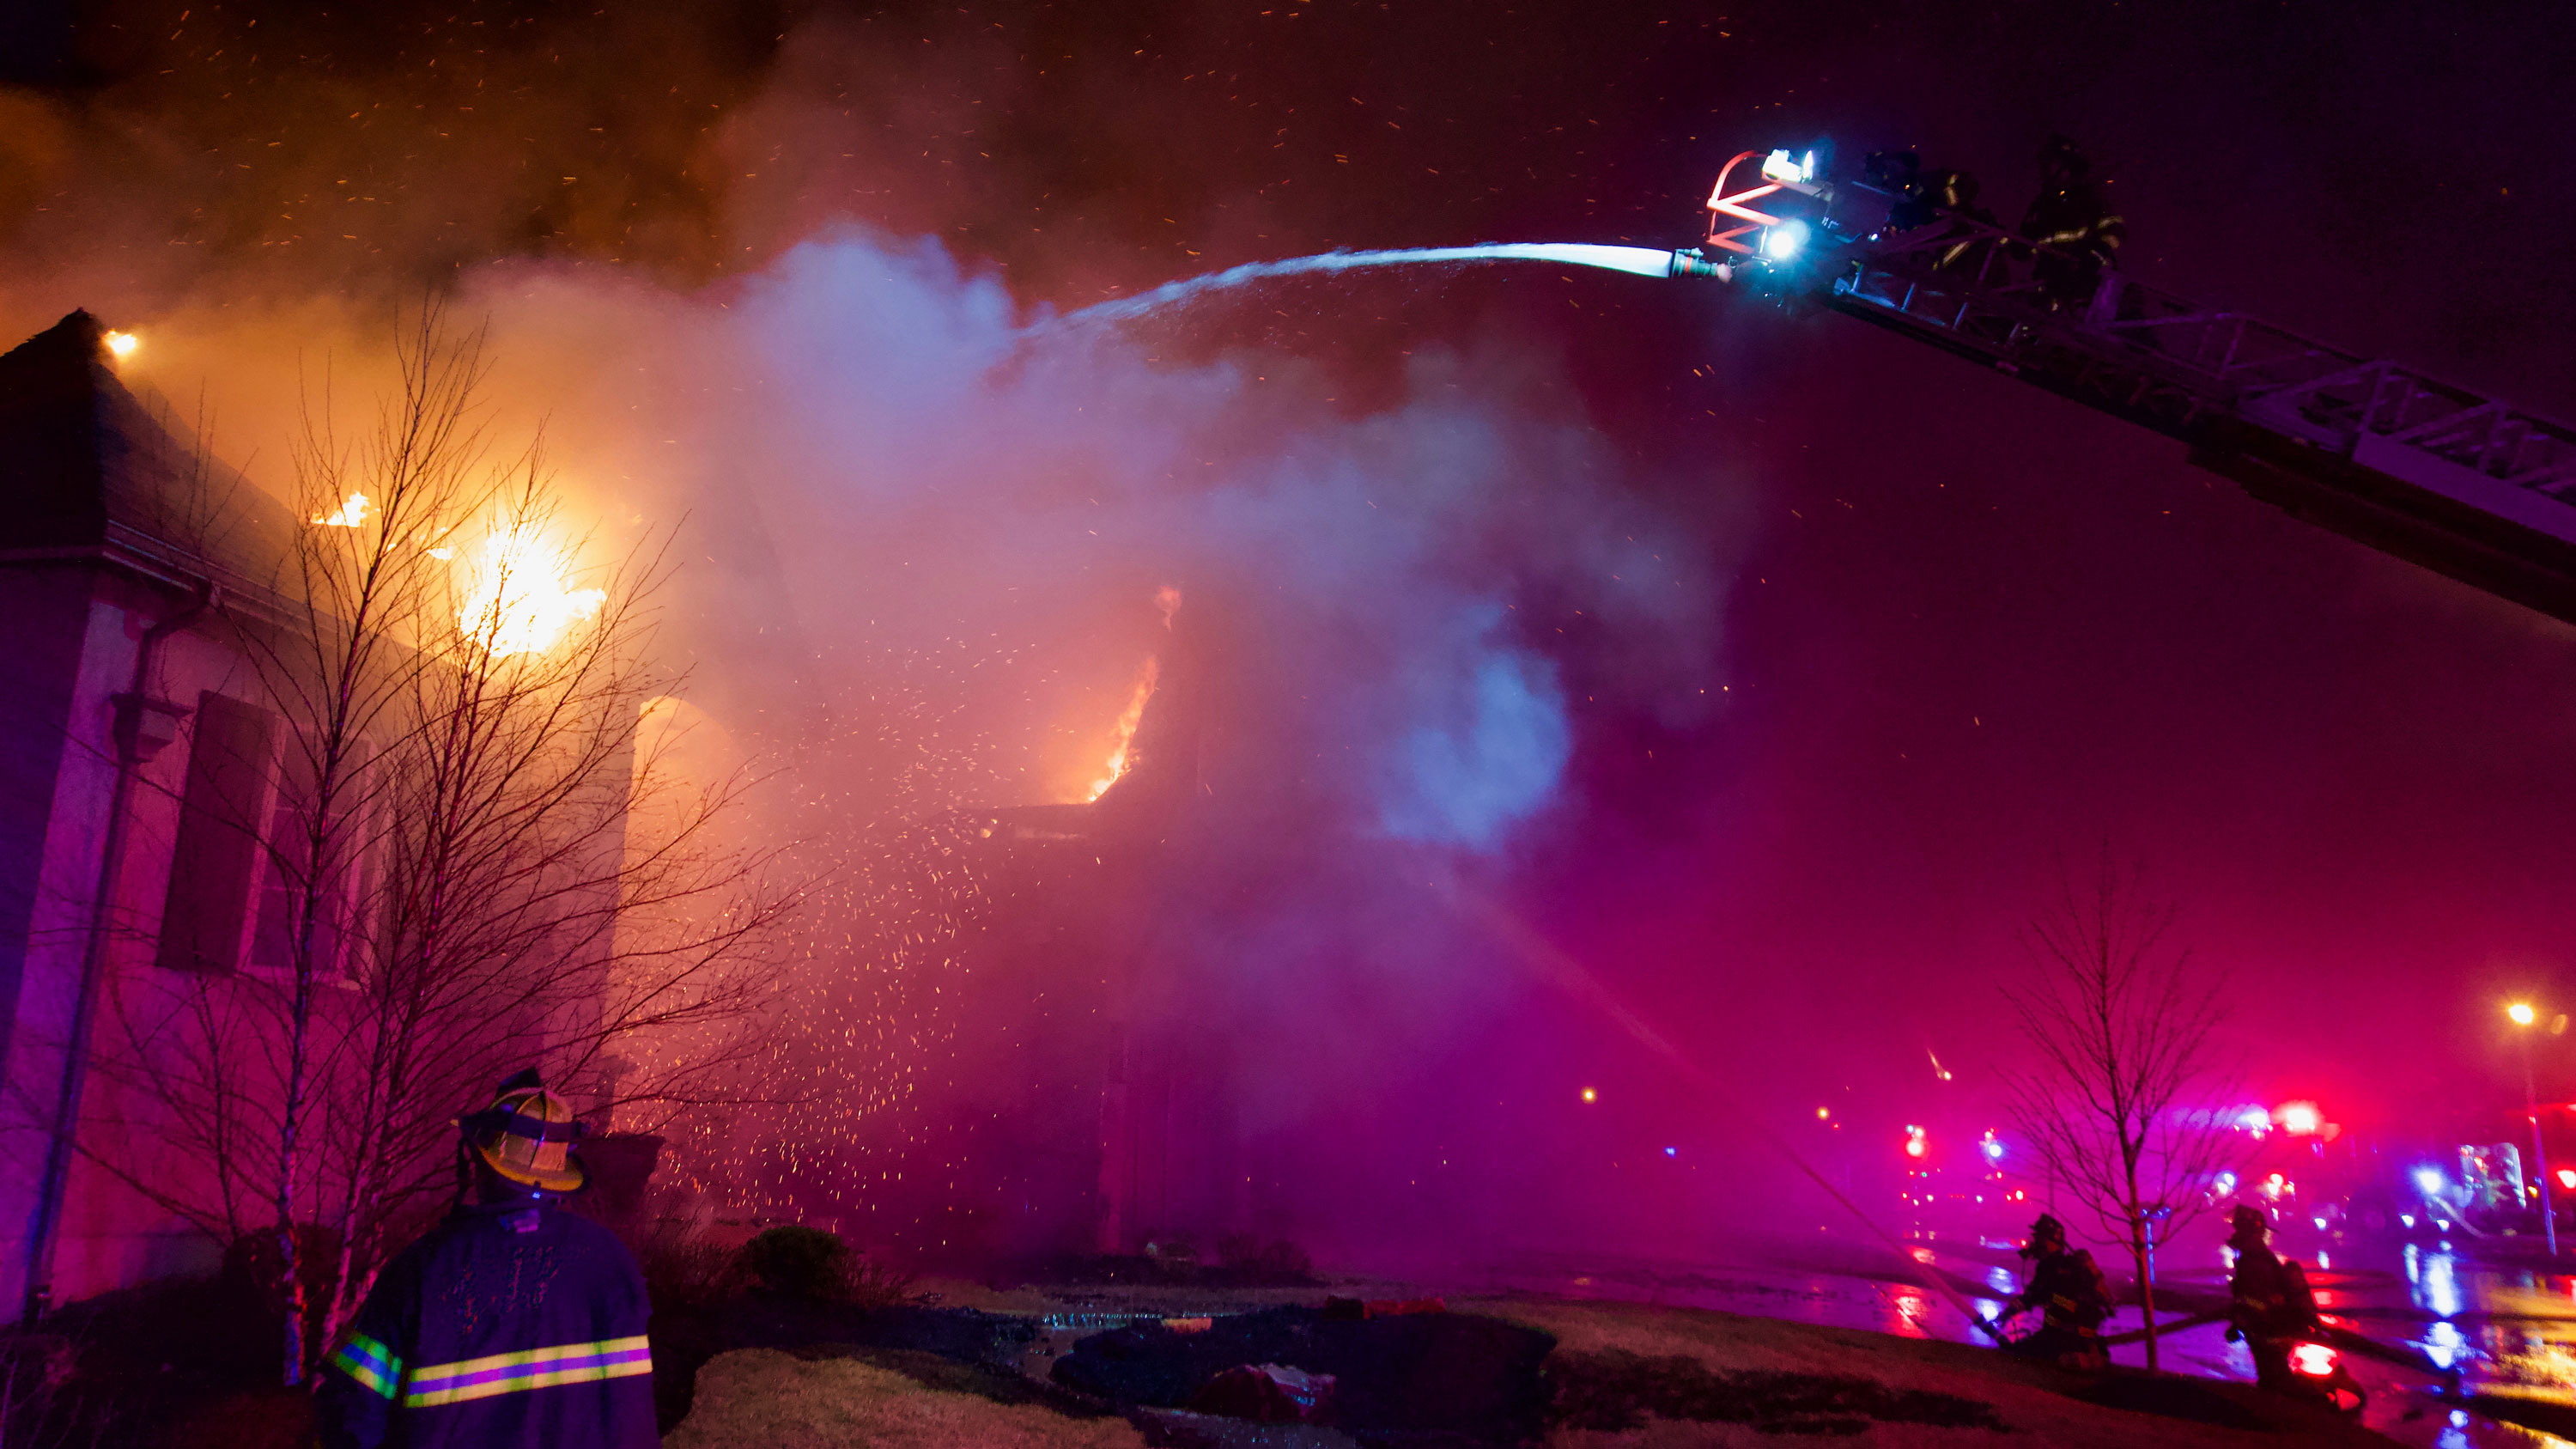 Firefighters at top of ladder fight house burning from roof fire with aerial stance at night